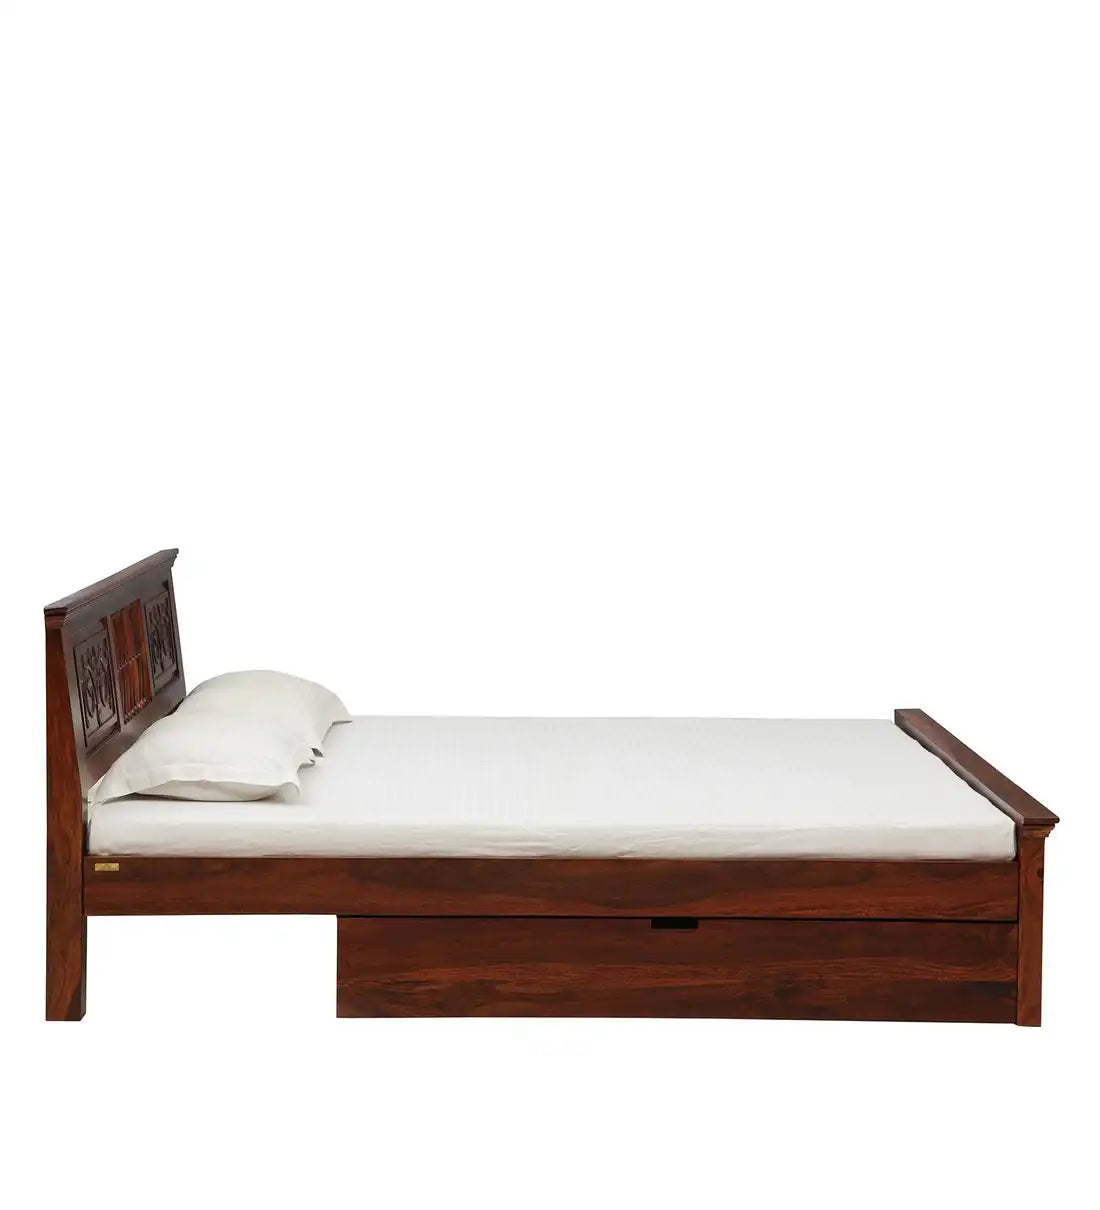 Devanti Traditional Solid Wood King Size Storage Beds